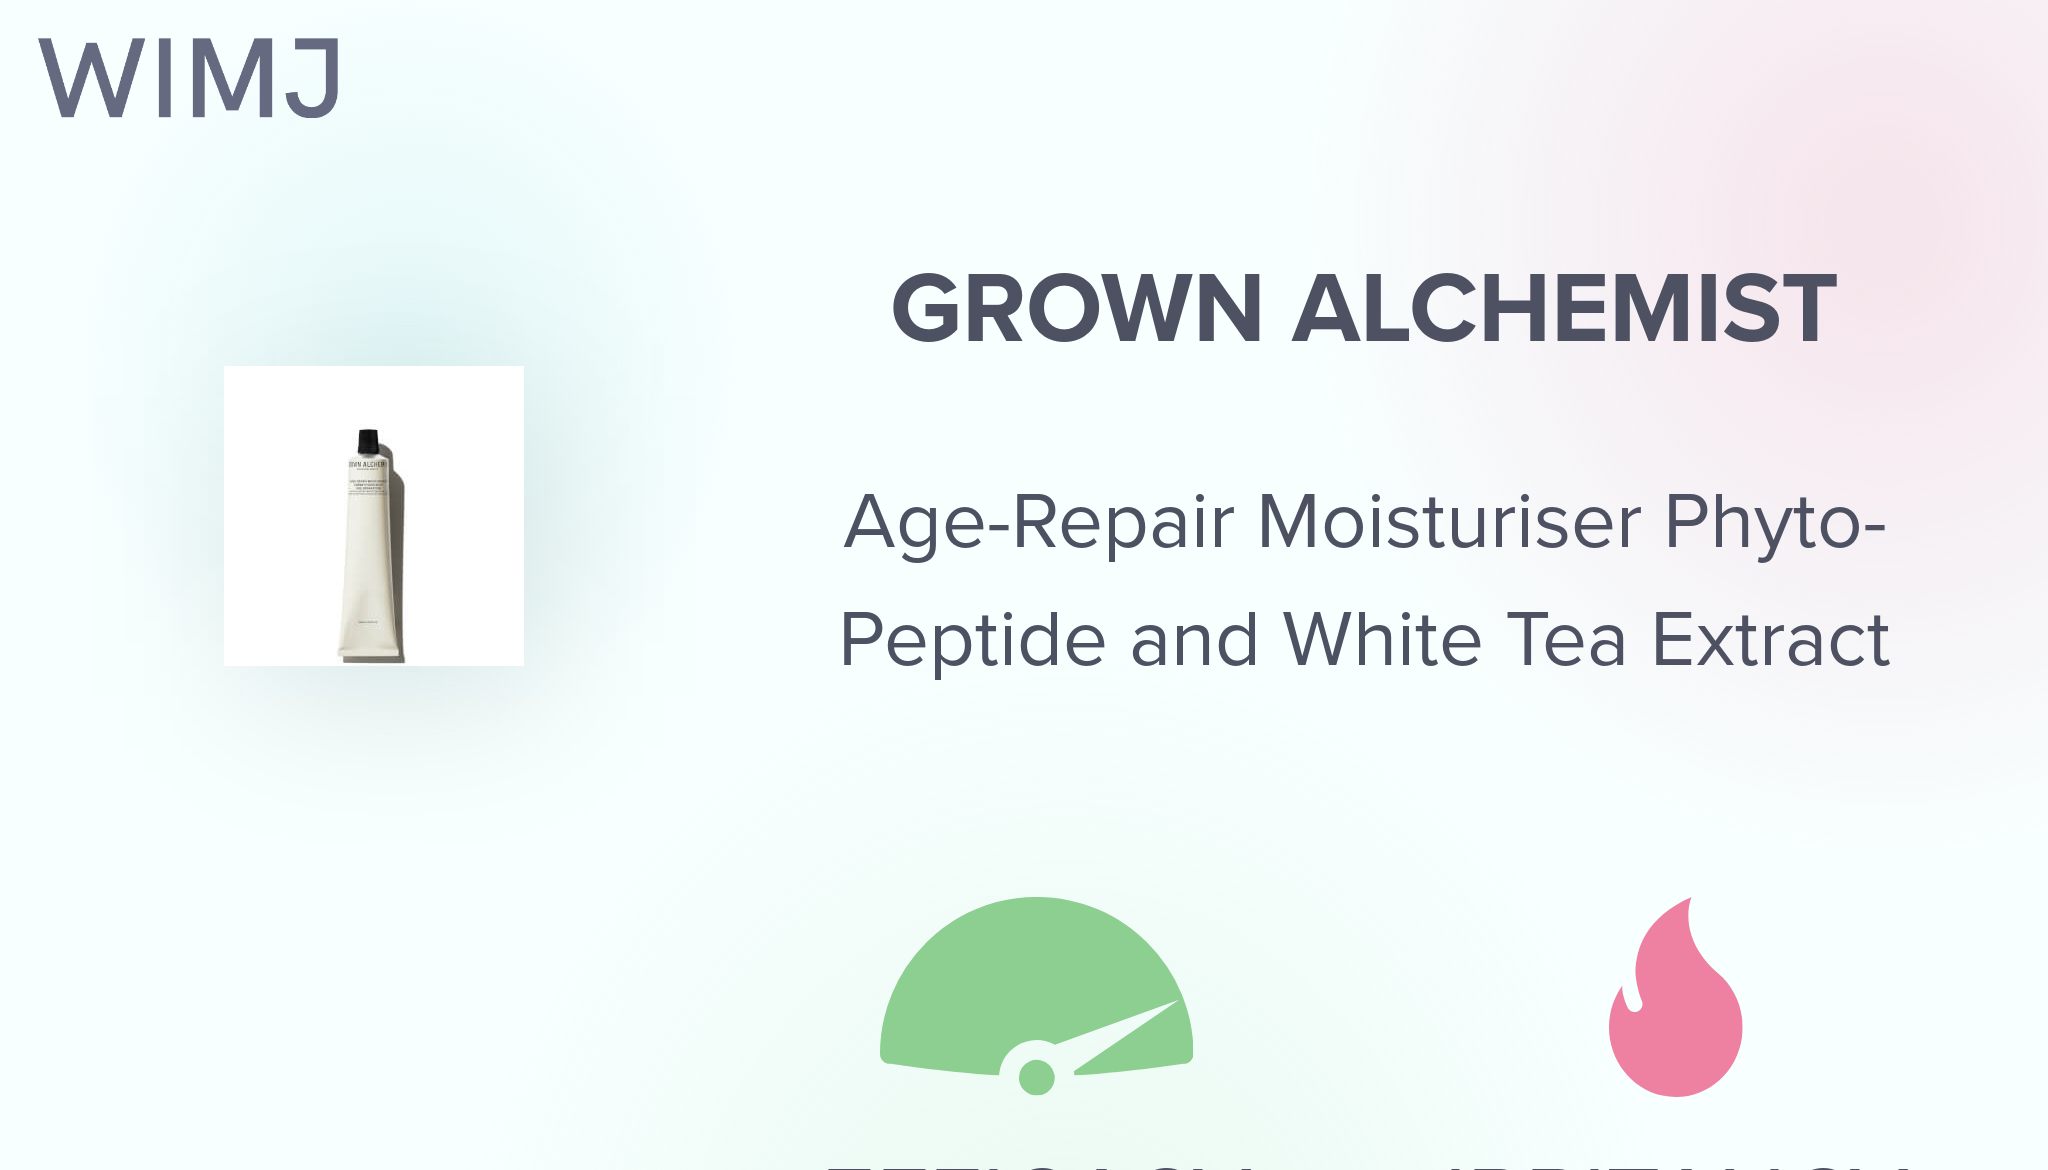 Review: Grown Alchemist - Tea - Age-Repair WIMJ Moisturiser and White Extract Phyto-Peptide